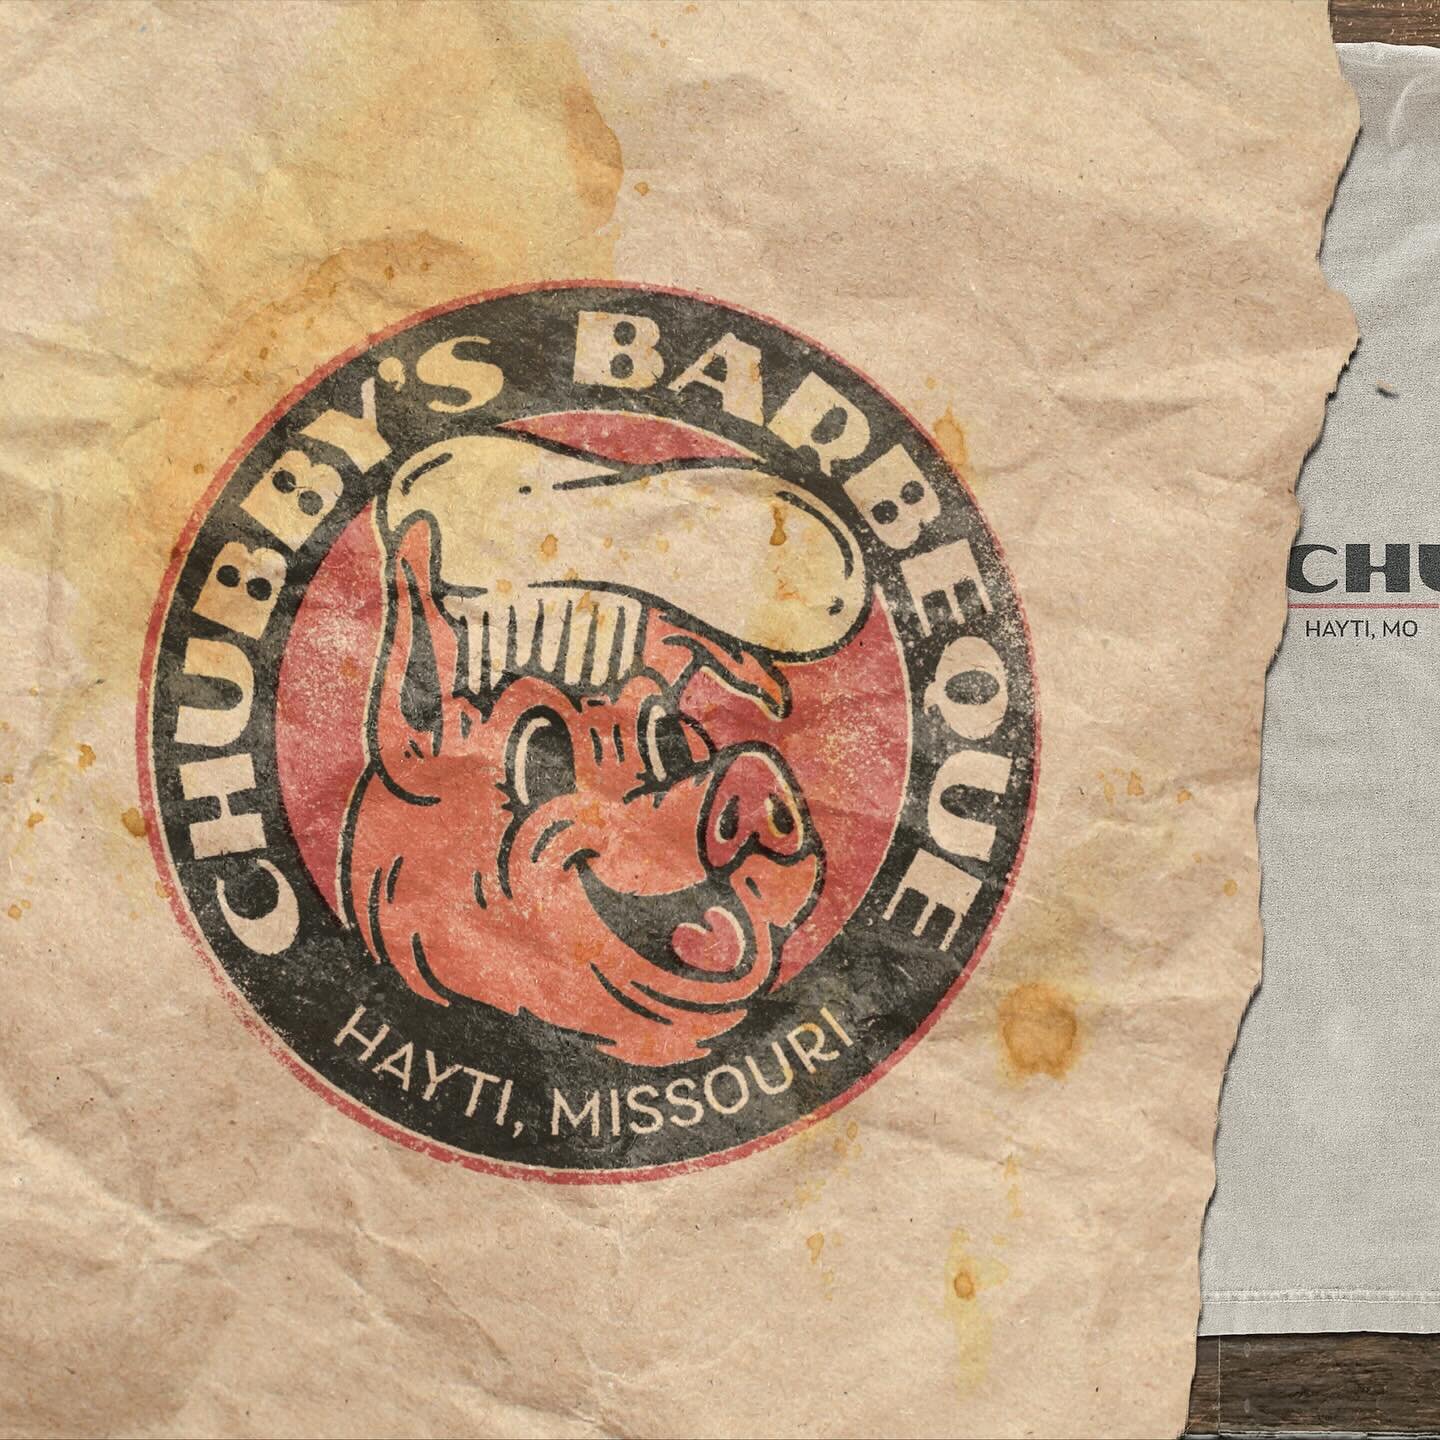 Had the great opportunity to rebrand Chubby&rsquo;s BBQ towards the end of last year. Here&rsquo;s a look at some of the mock-ups I made for the branding!